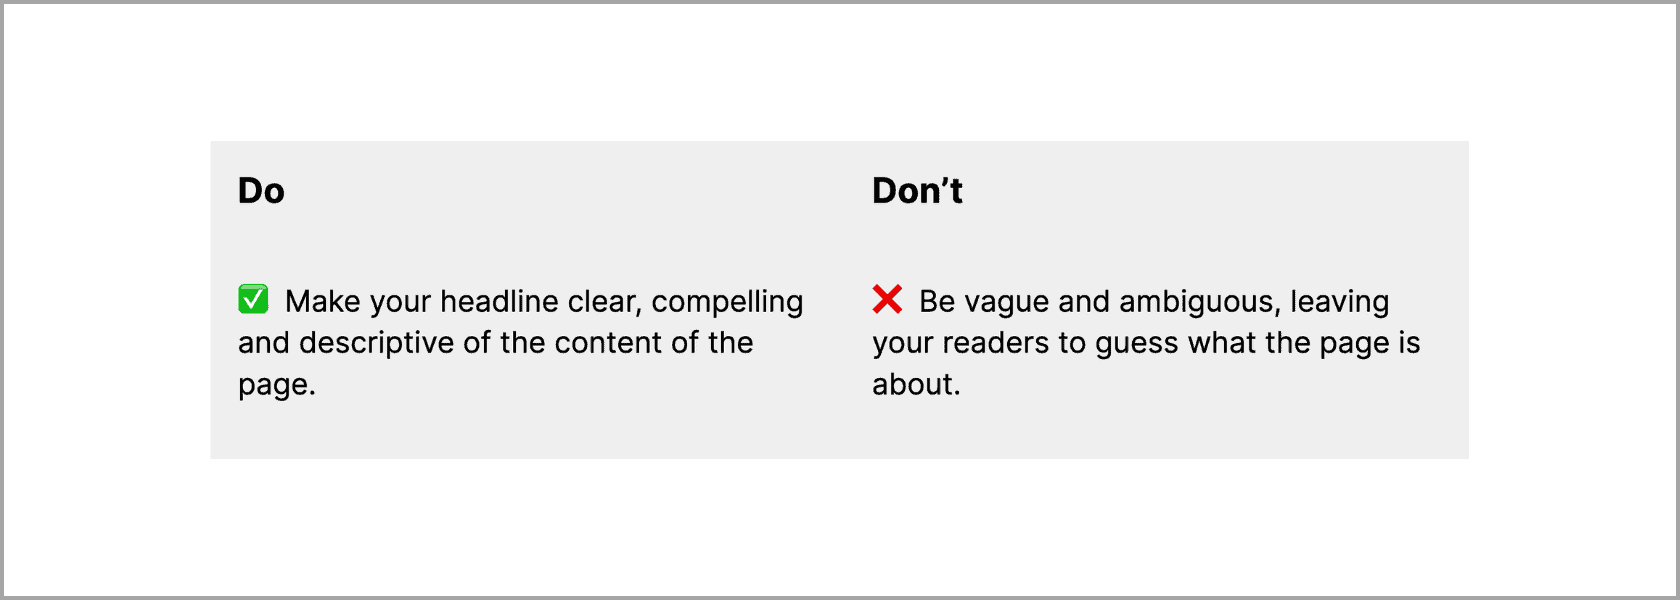 A graphic table reading: "Do: Make your headline clear, compelling and descriptive of the content of the page." and "Don't: Be vague and ambiguous, leaving your readers to guess what the page is about."